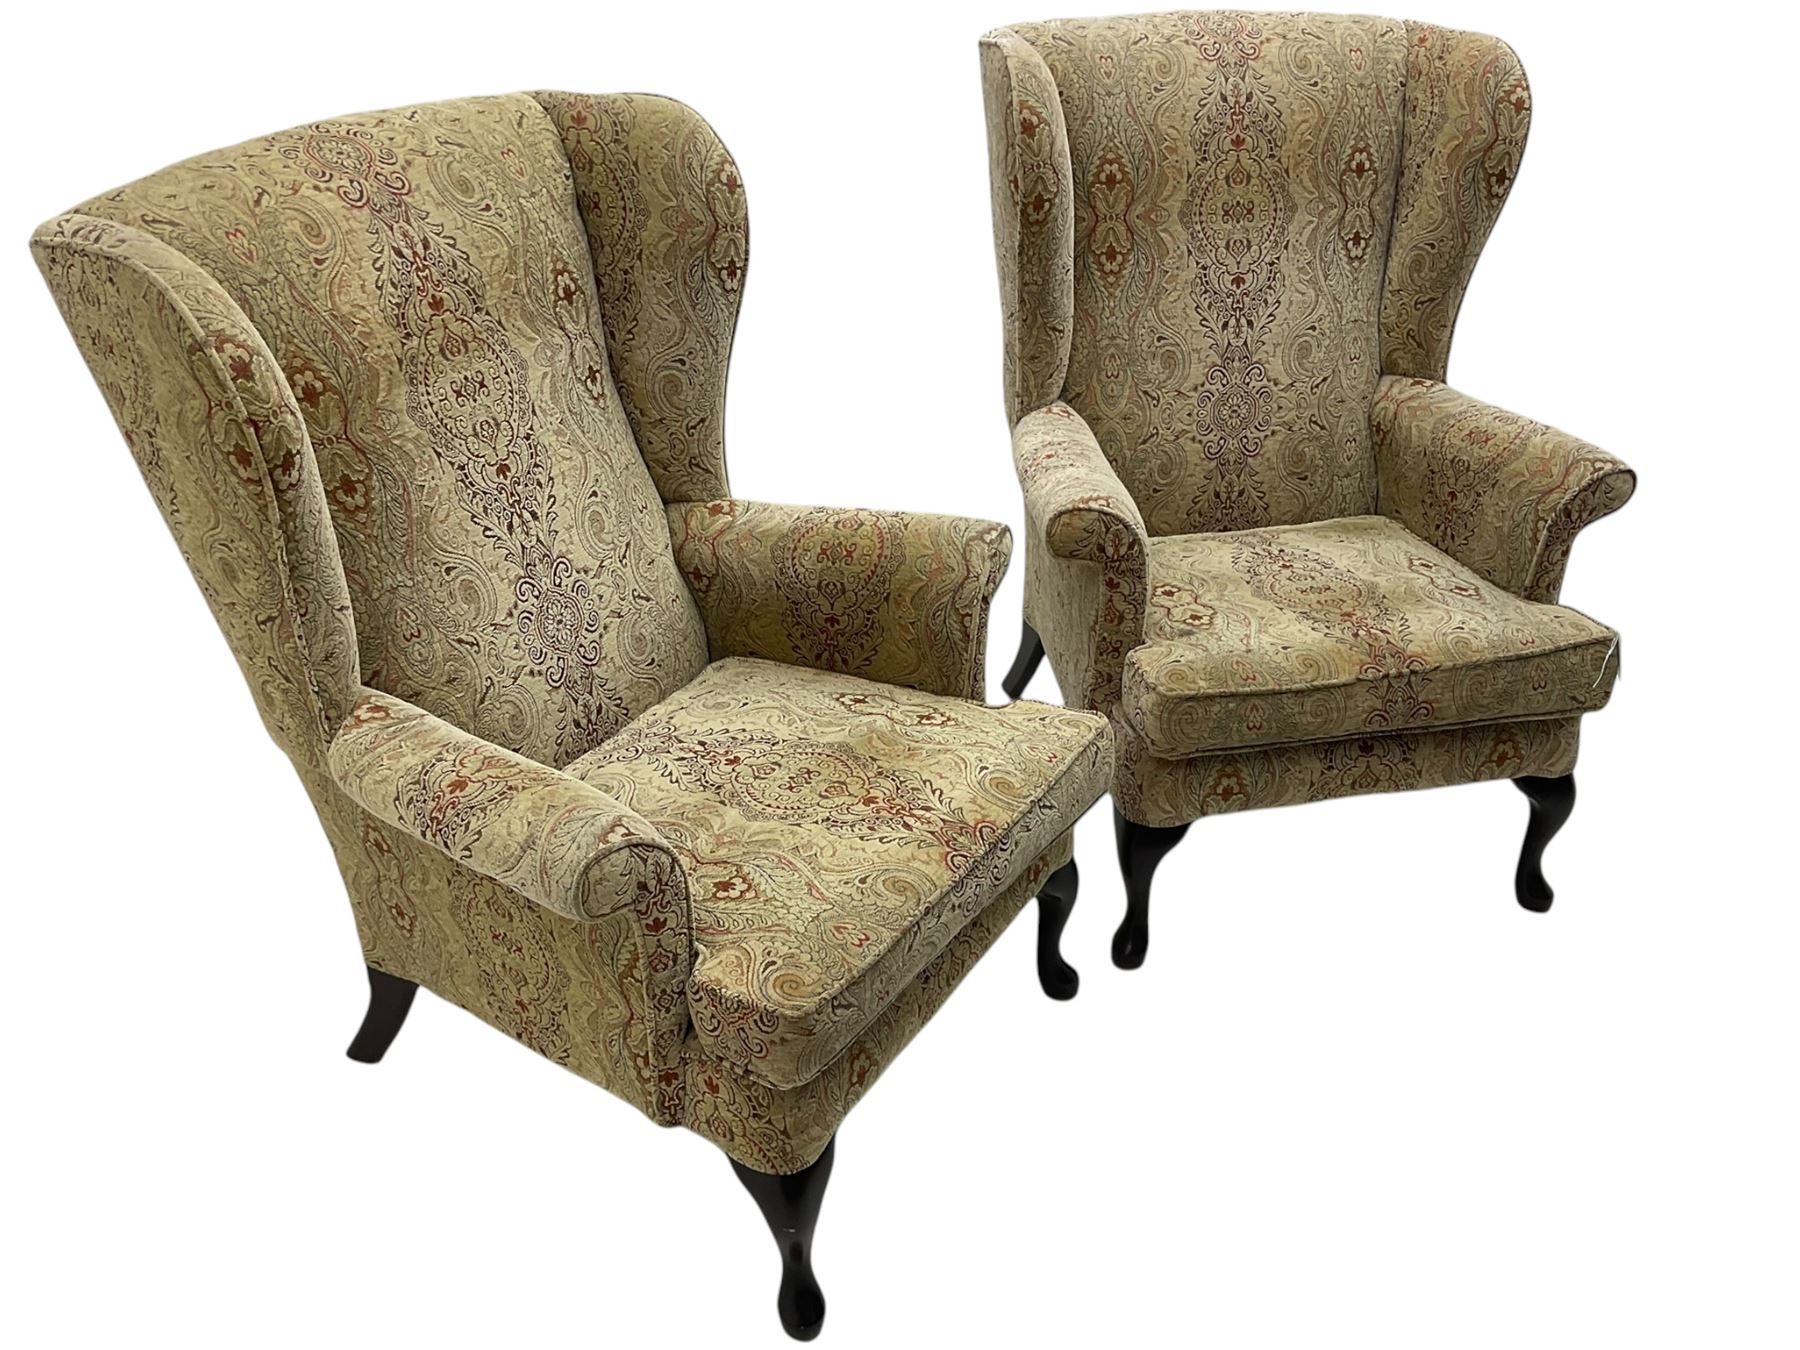 Parker Knoll - 'Burghley' pair of wingback armchairs - Image 4 of 5